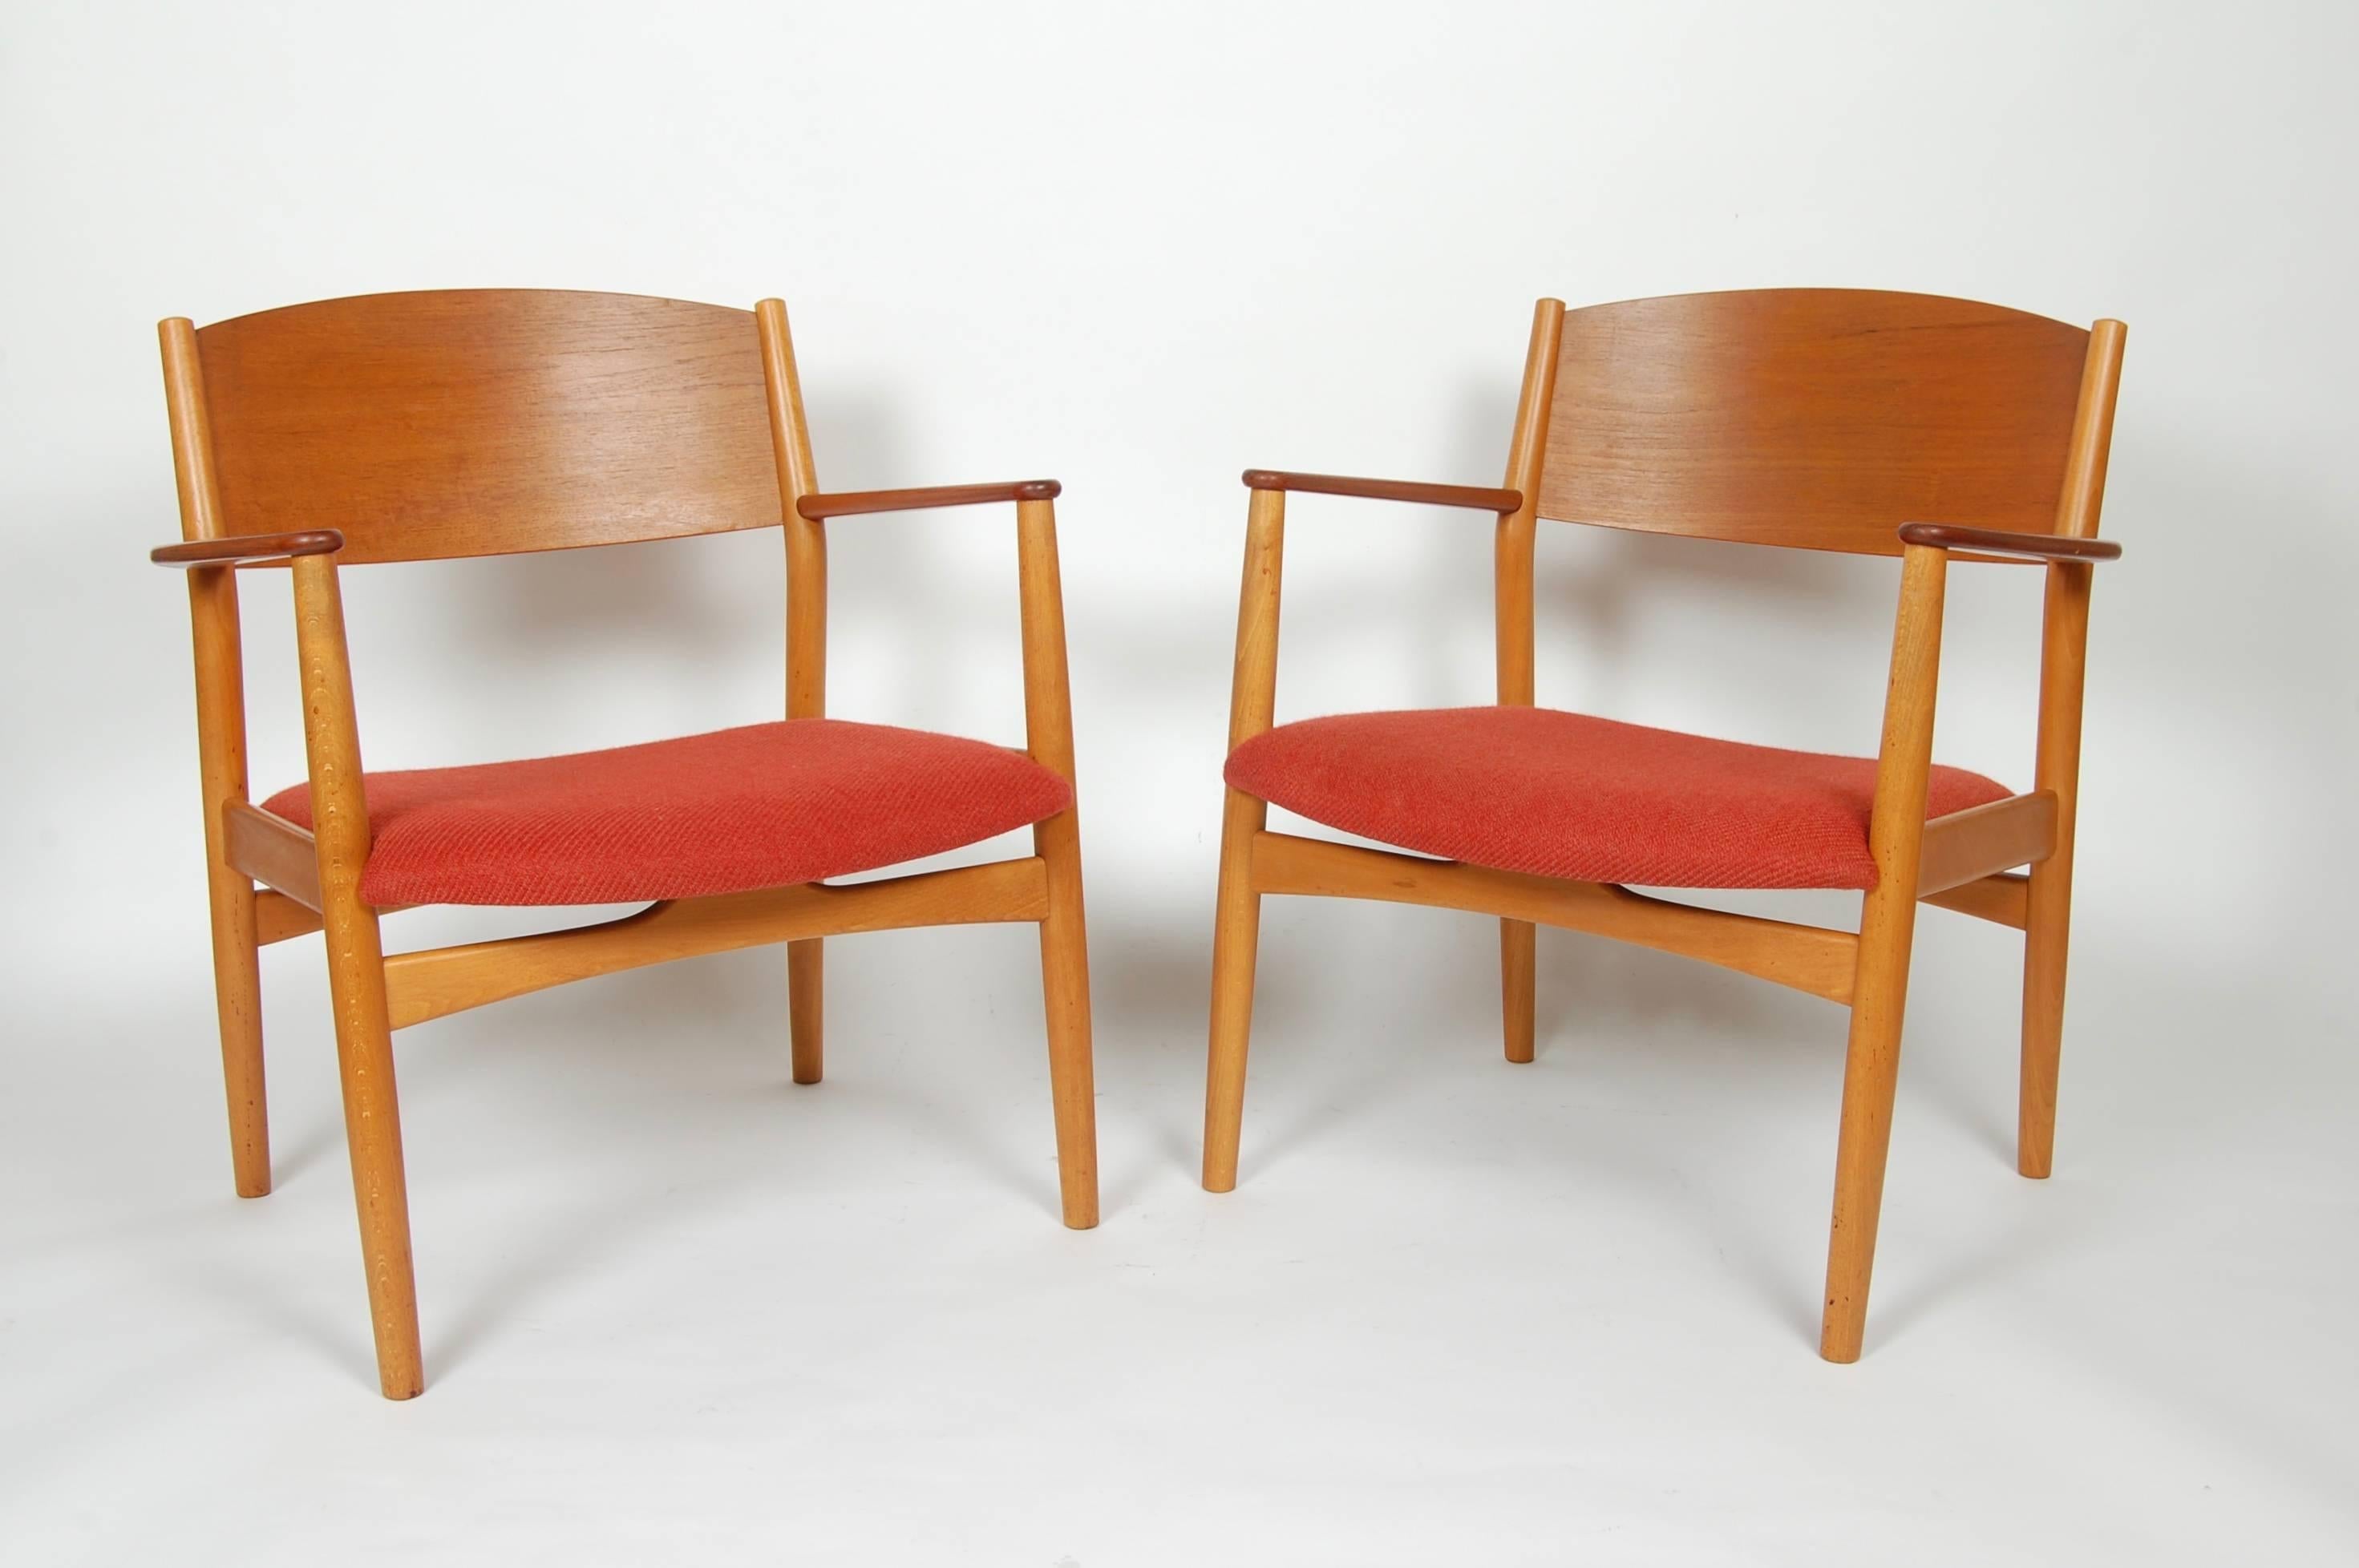 Early 1950s production Borge Mogensen model 147 armchairs. Created out of a mixture of teak and beechwood. Wide seat and back for comfort, wool rust colored upholstered seats.